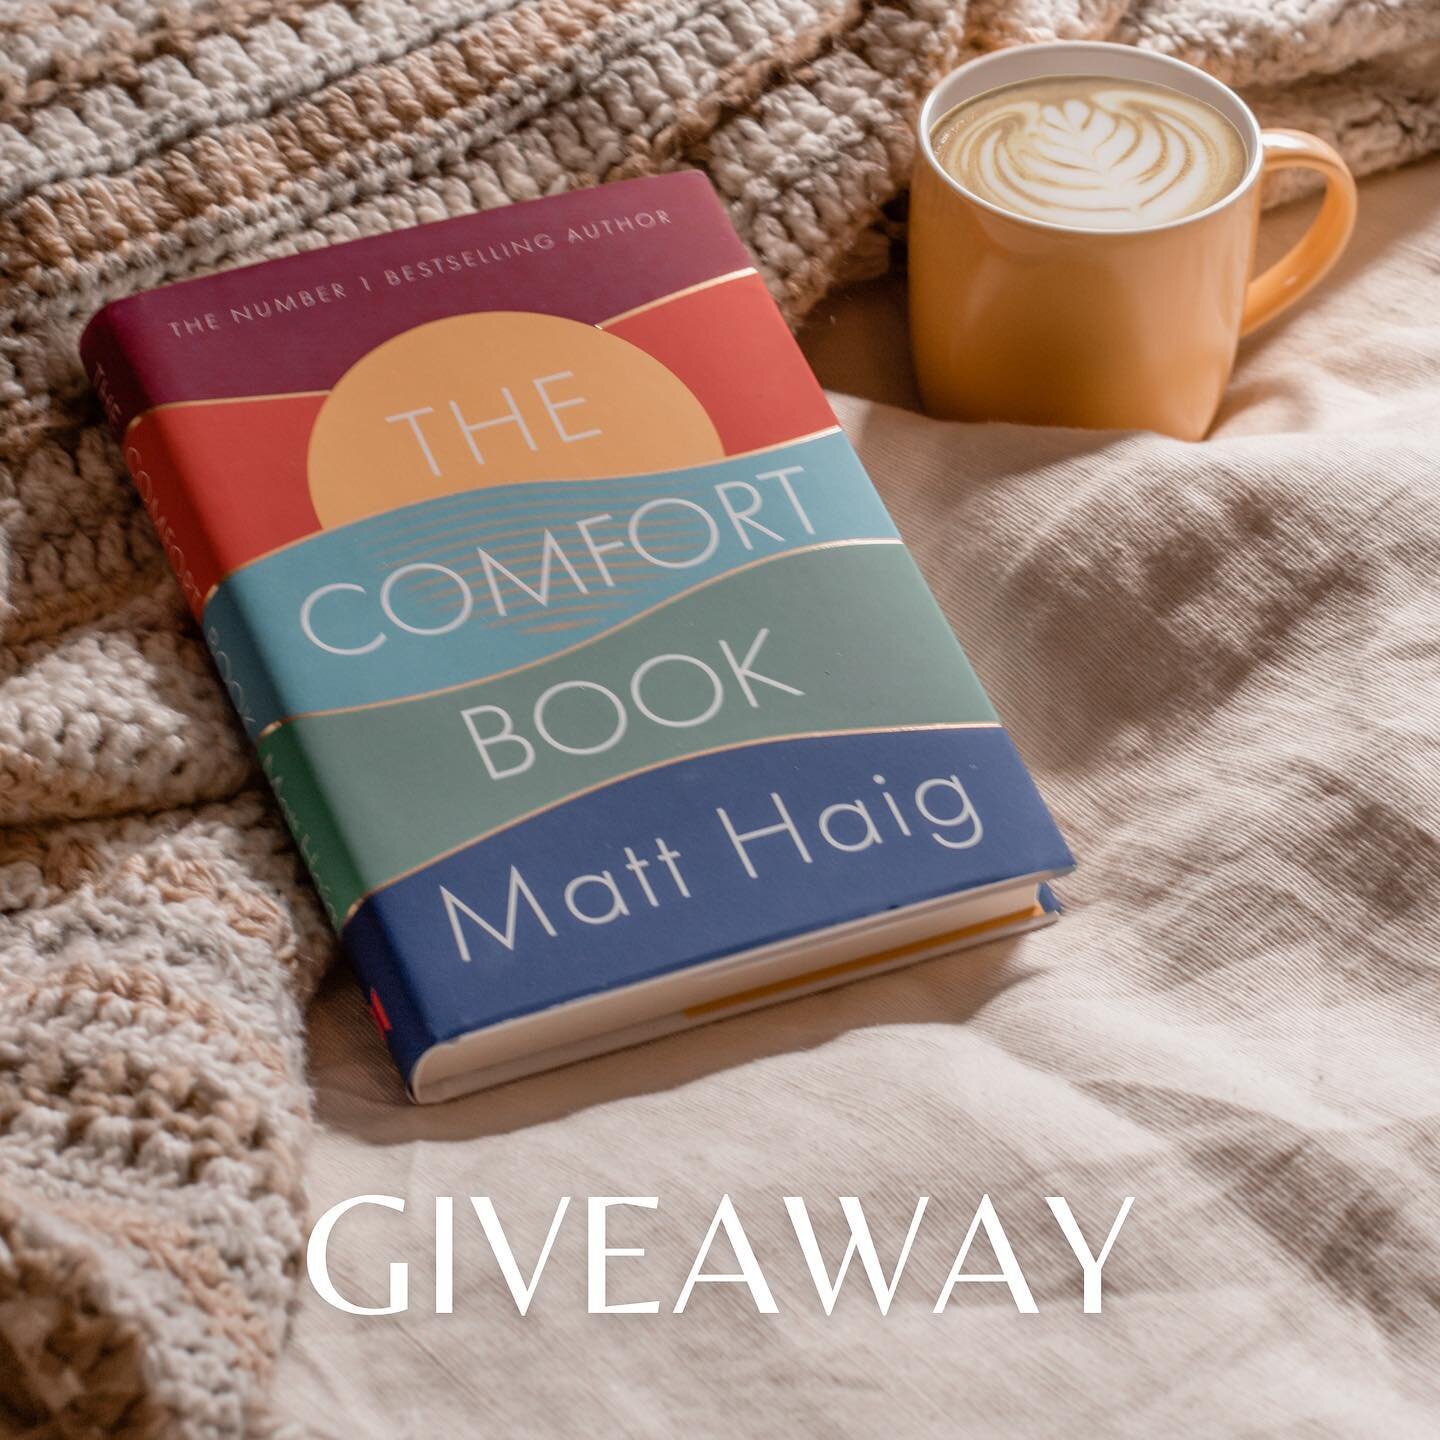 Happy publication day to the wonderful @mattzhaig! To celebrate, I&rsquo;ve teamed up with @canongatebooks to bring you the chance of winning a copy! I&rsquo;m so excited for whoever wins this, because this book brought me so much comfort, and just m